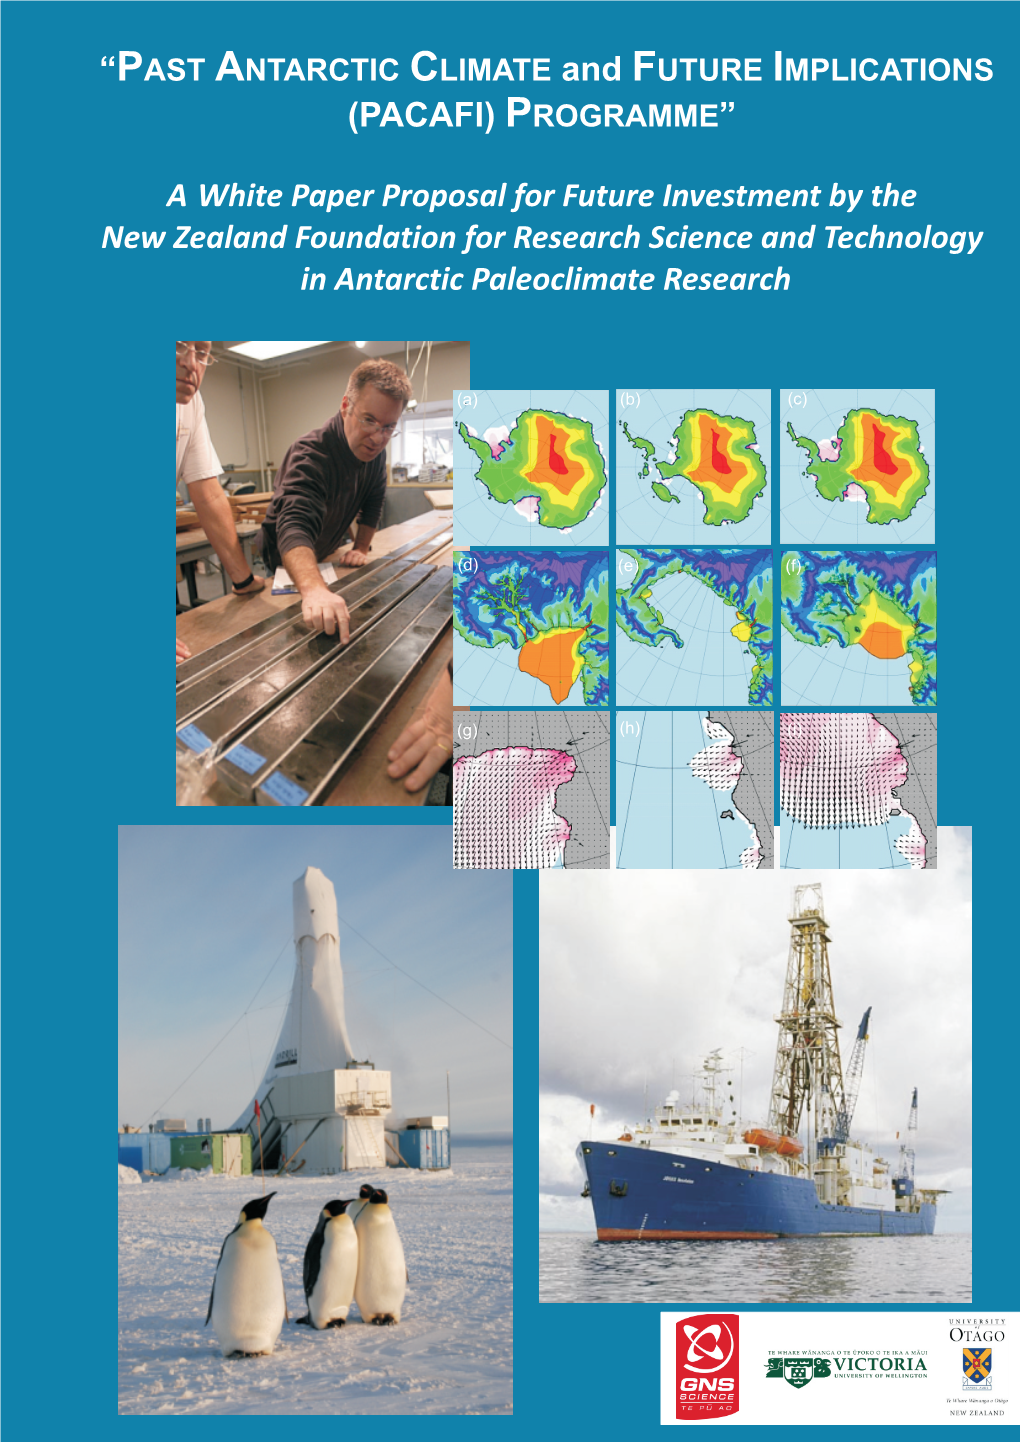 (PACAFI) PROGRAMME” a New Zealand Foundation for Research